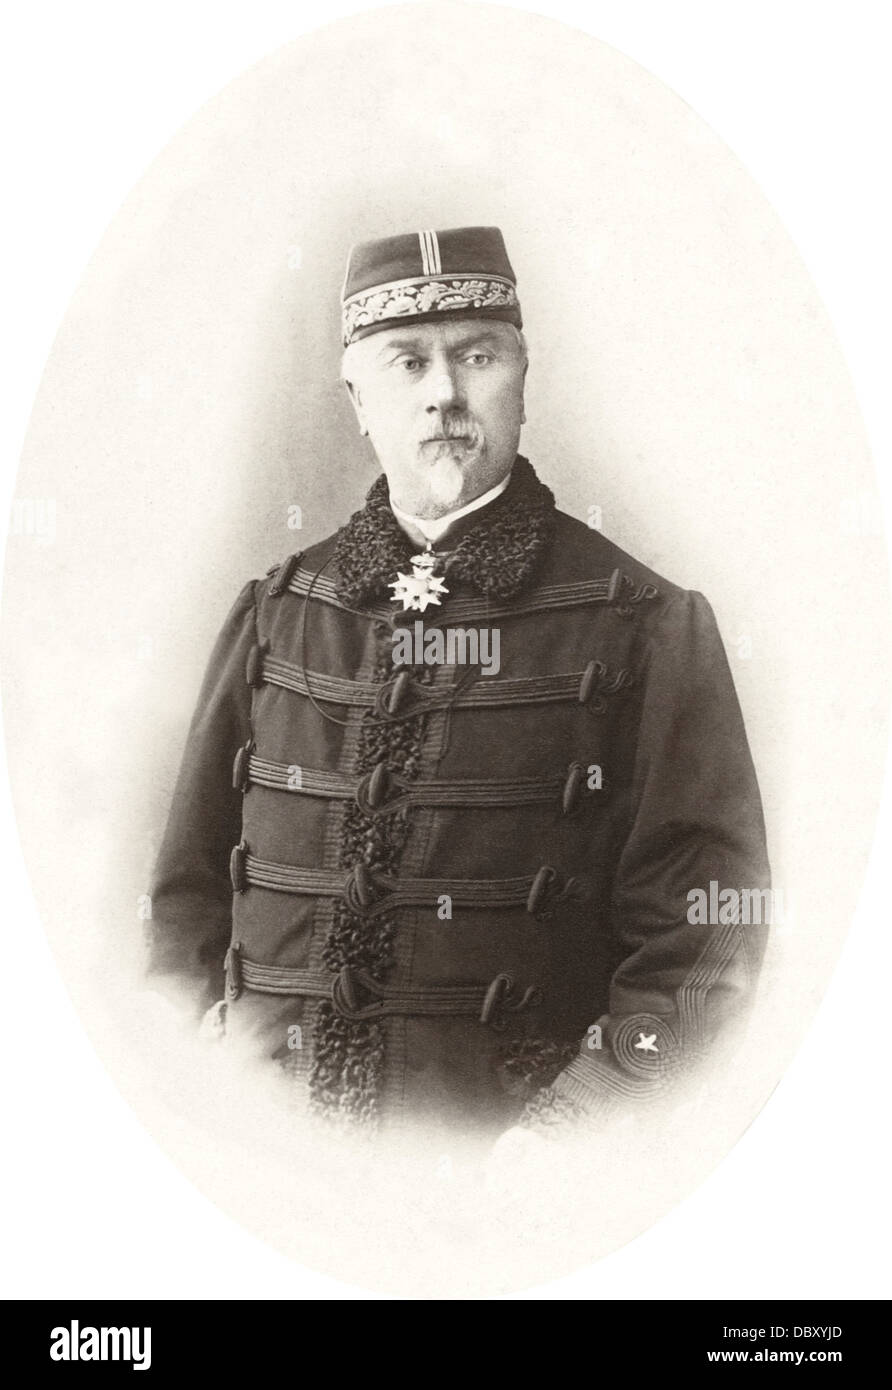 Hanoteau Adolphe (1814 - 1897), French general, linguist, author of studies on the Kabyle. Stock Photo